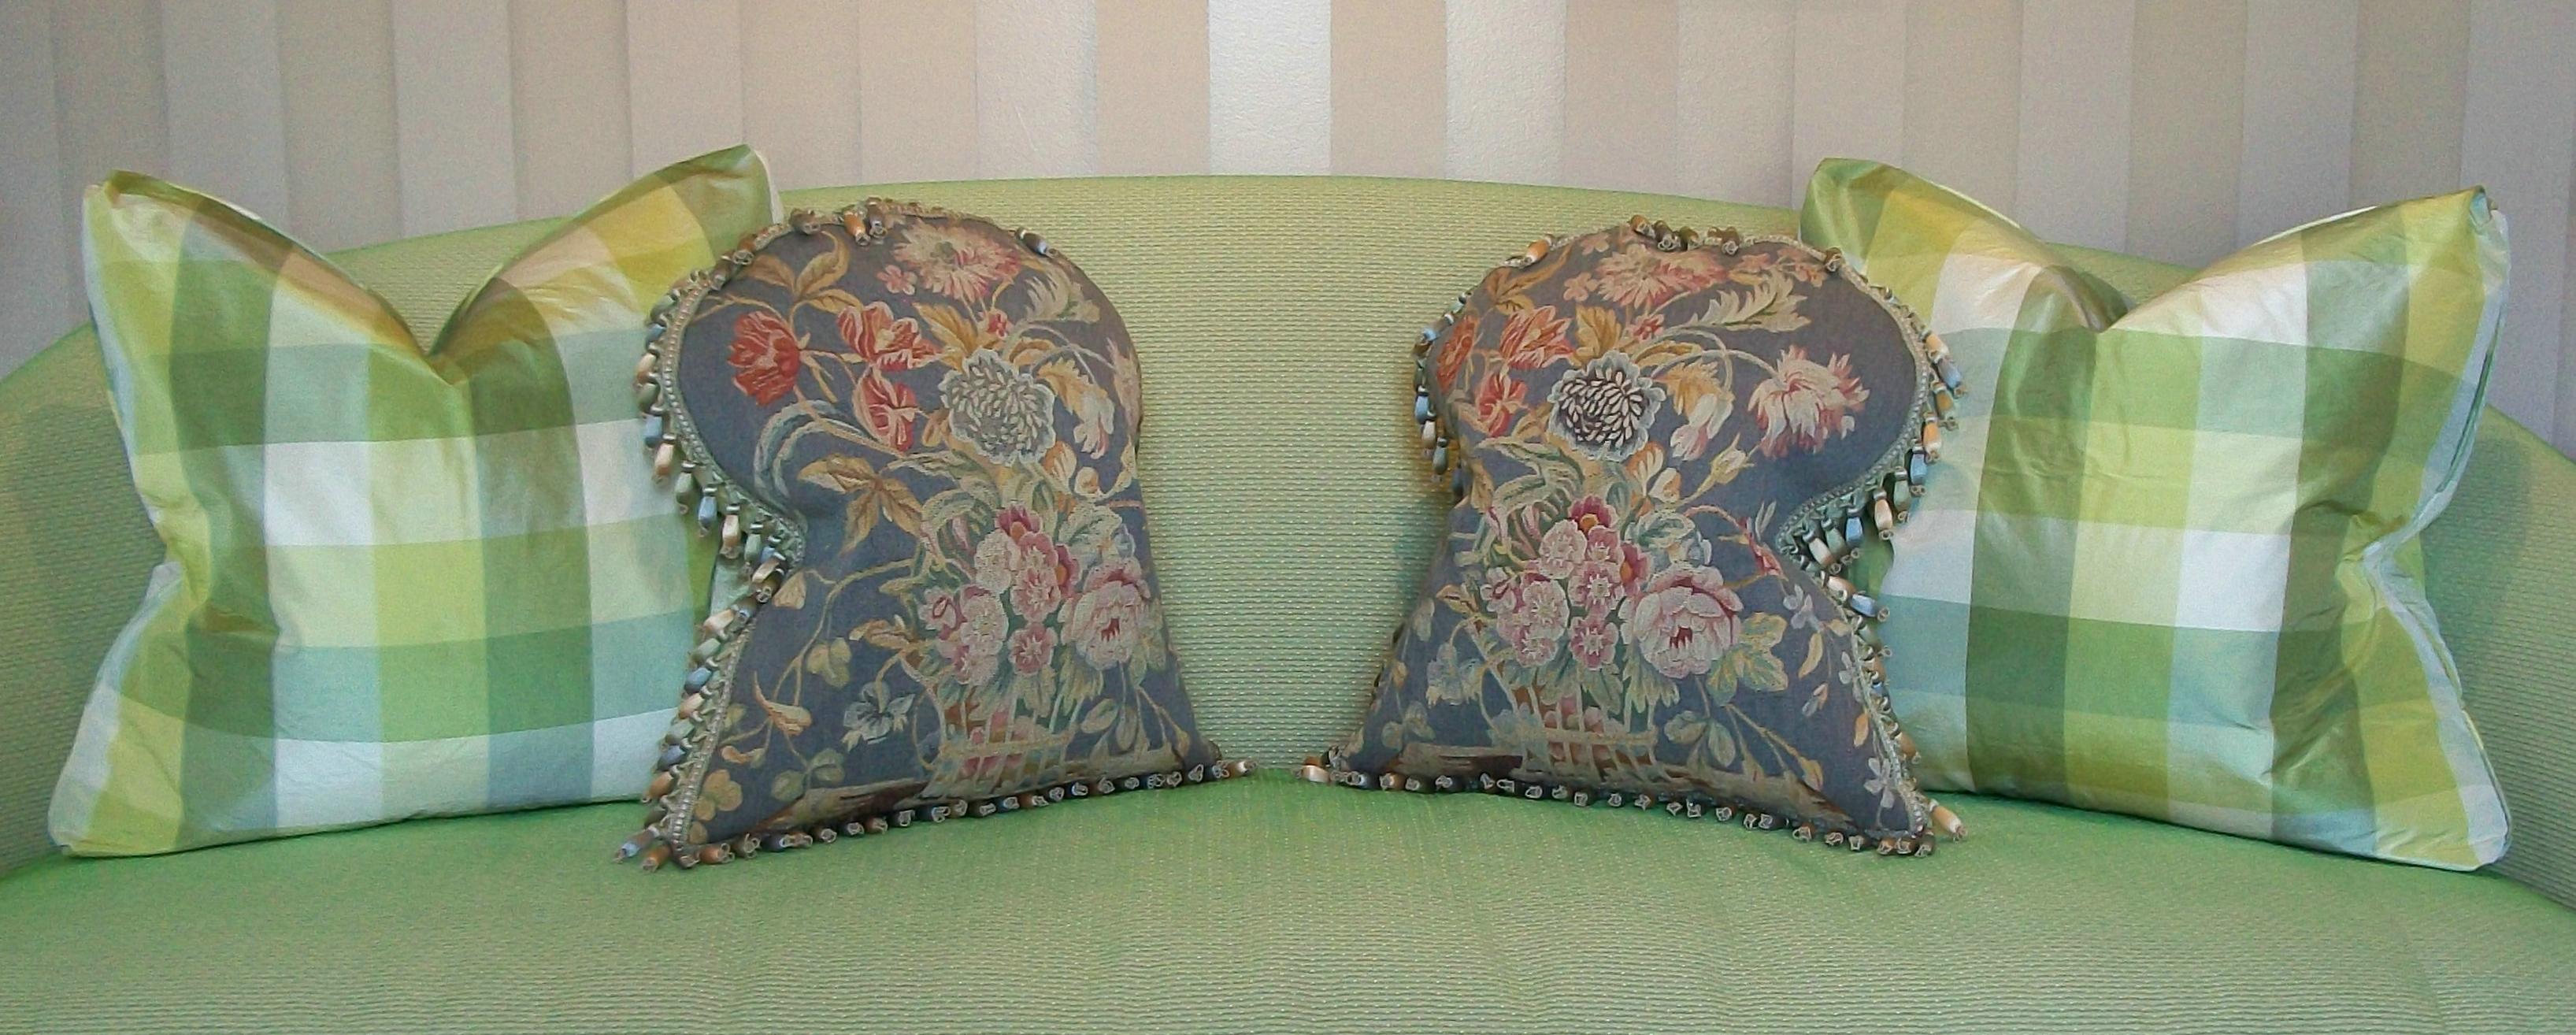 Antique pair of Aubusson tapestry pillows - featuring baskets filled with flowers to each pillow front - hand woven with silk threads for the flowers, leaves and stems - set against a gray wool background - the tapestries framed by hand sewn French